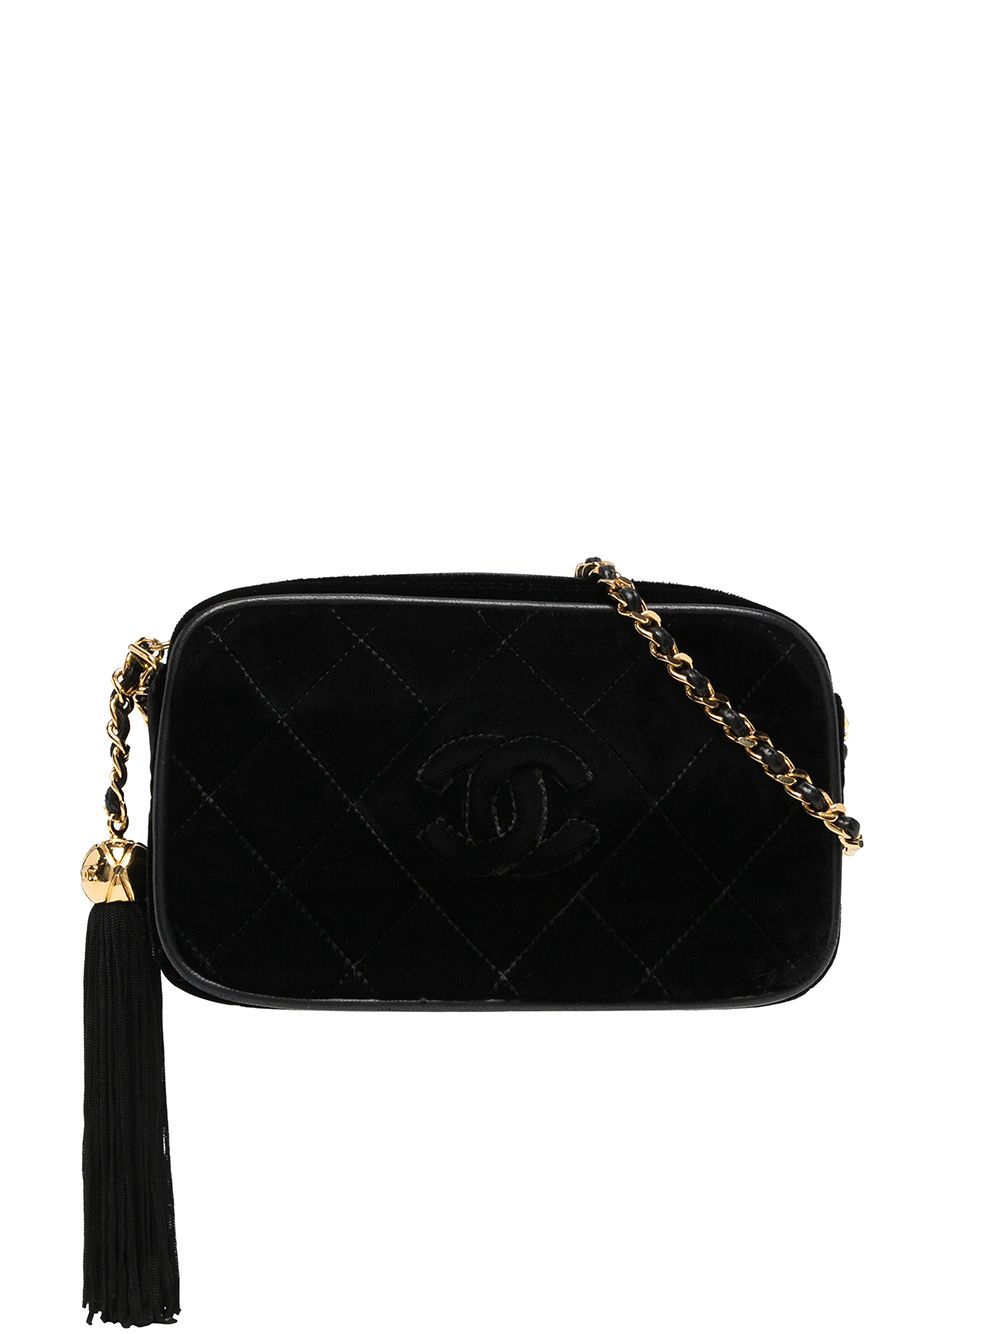 CHANEL Pre-Owned 1992 Diamond Quilted Tassel Camera Bag - Farfetch